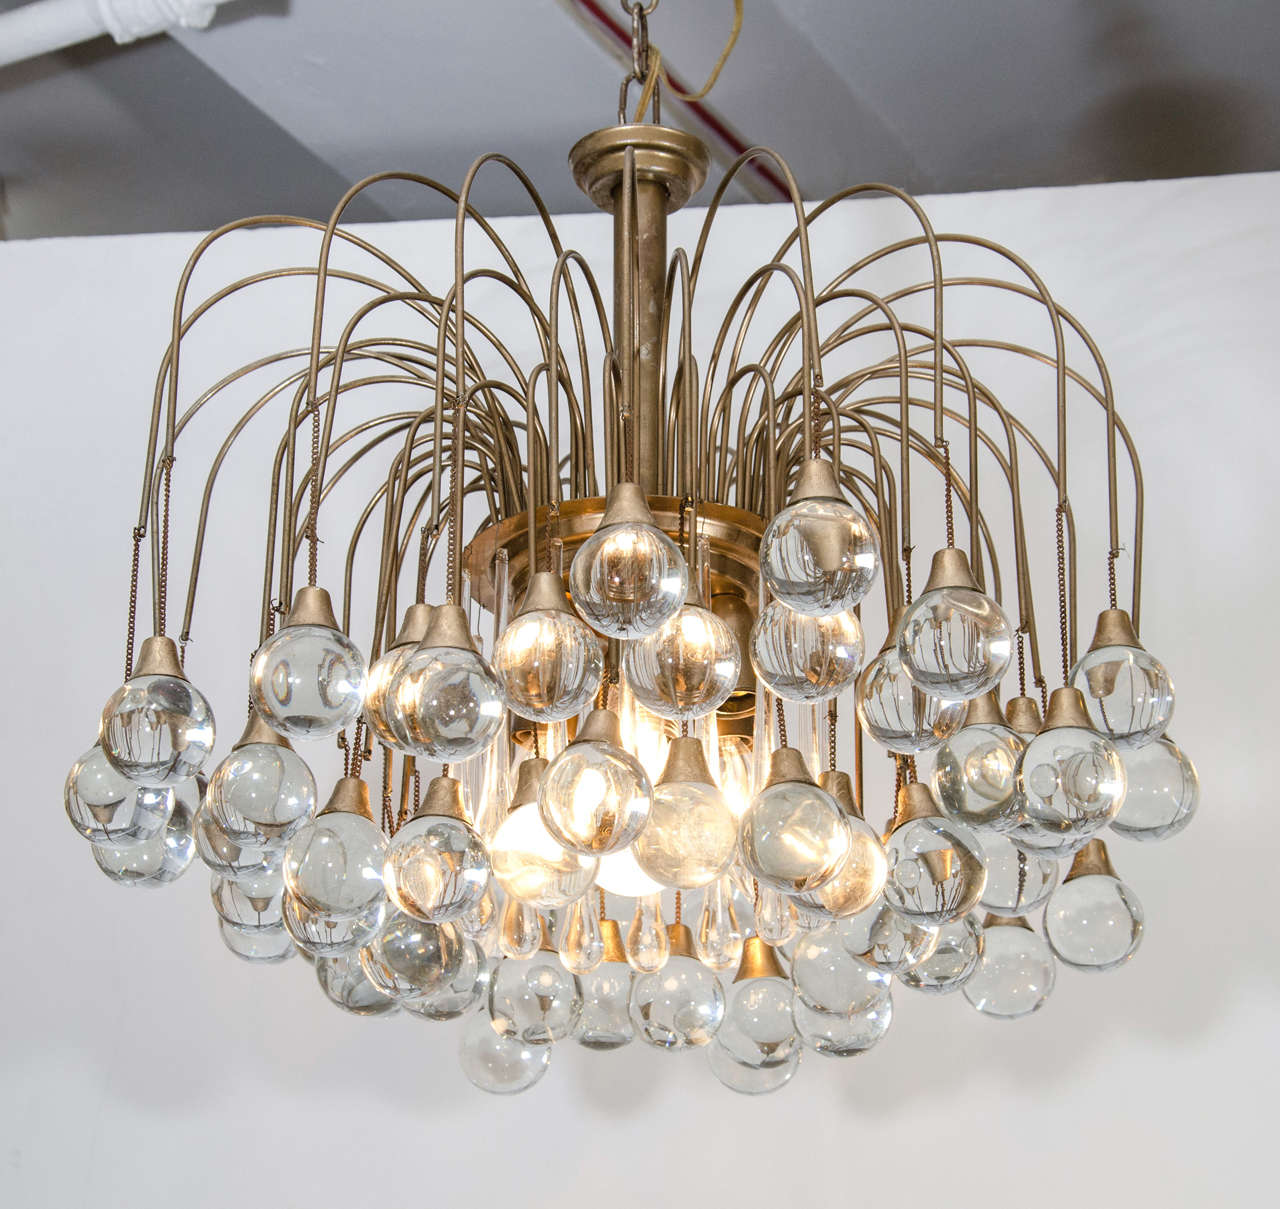 A vintage chandelier with clear glass drops hanging from brass arms.